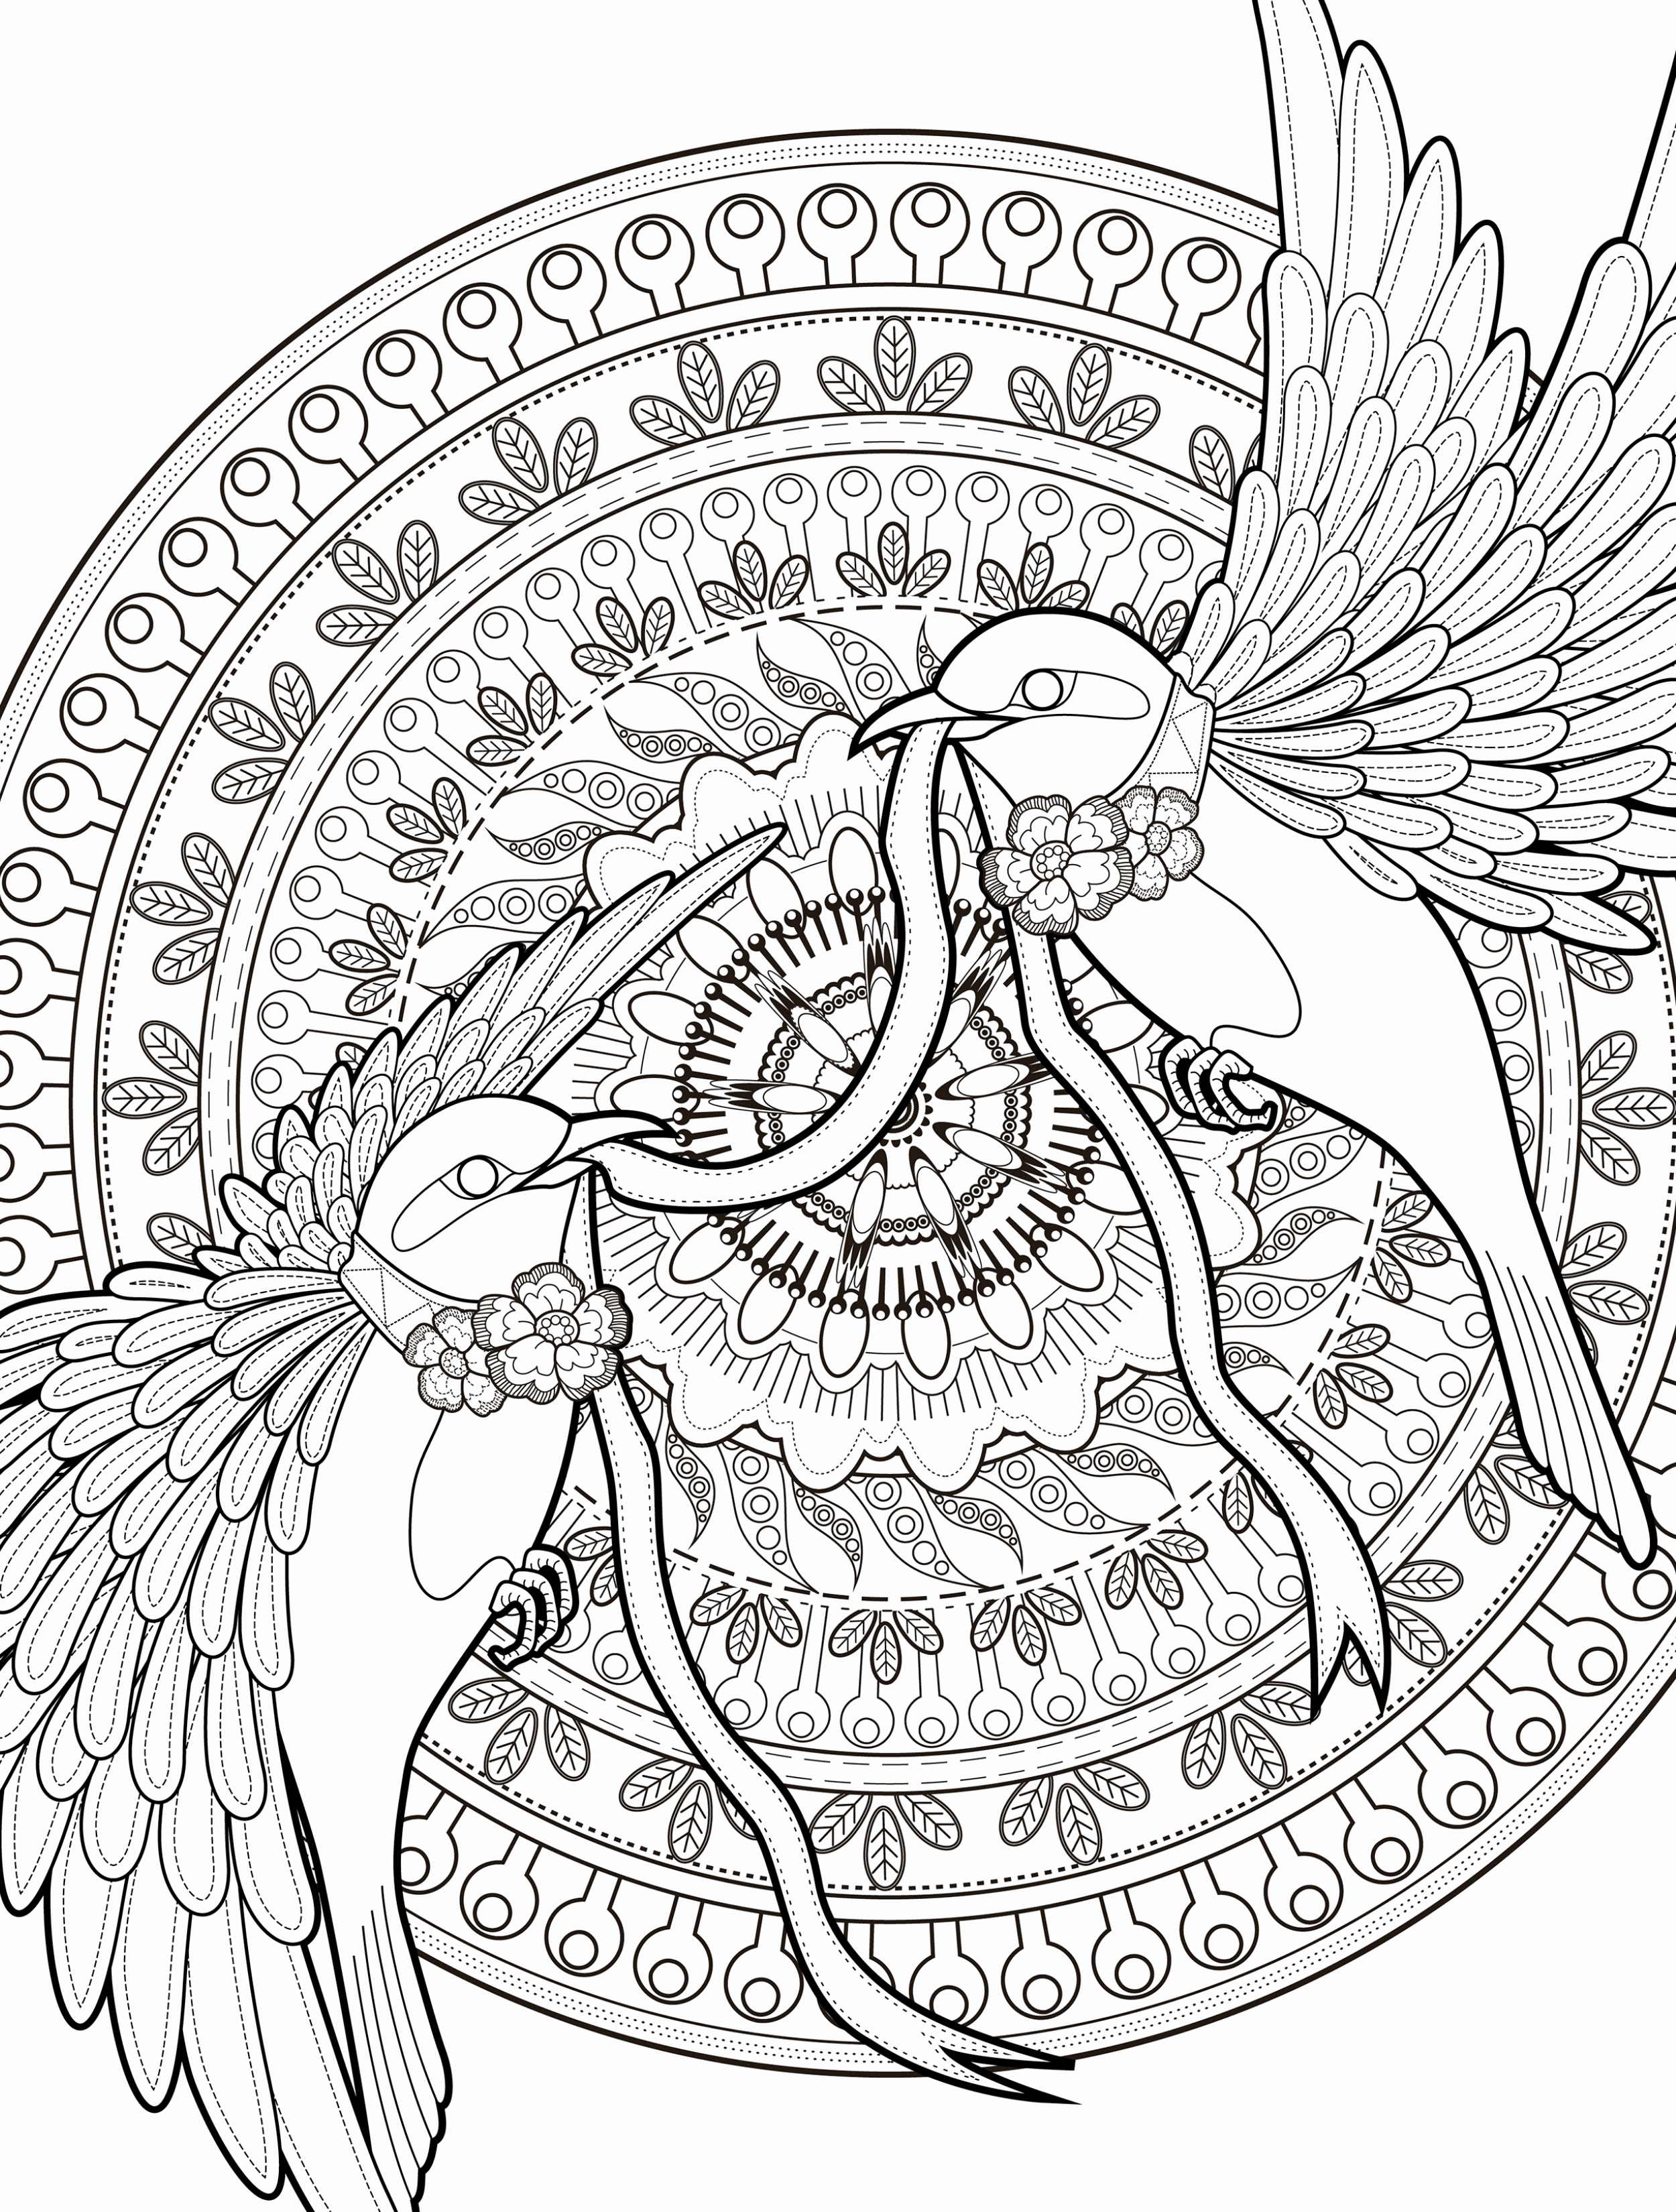 free-adult-coloring-pages-pdf-at-getcolorings-free-printable-31680-the-best-porn-website